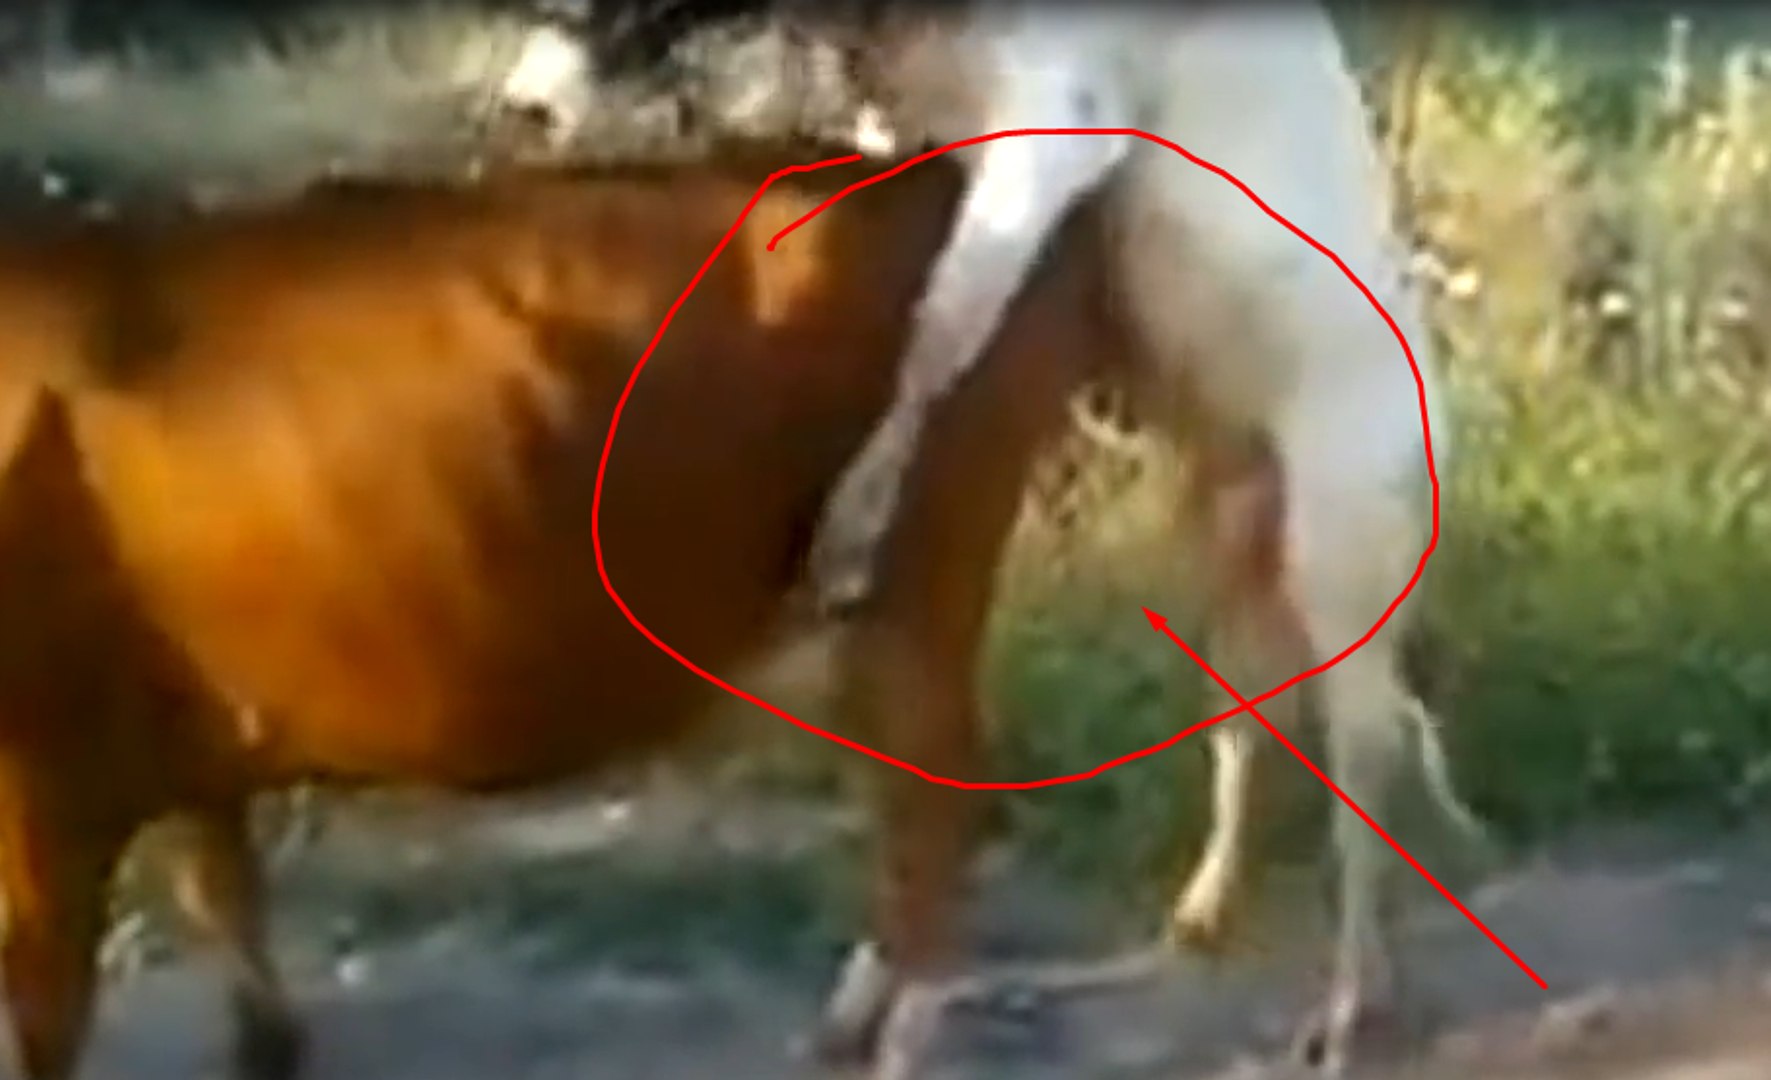 Cow Sex Xx Video - New Animal Sex- Bull Crazy on Cow - video dailymotion